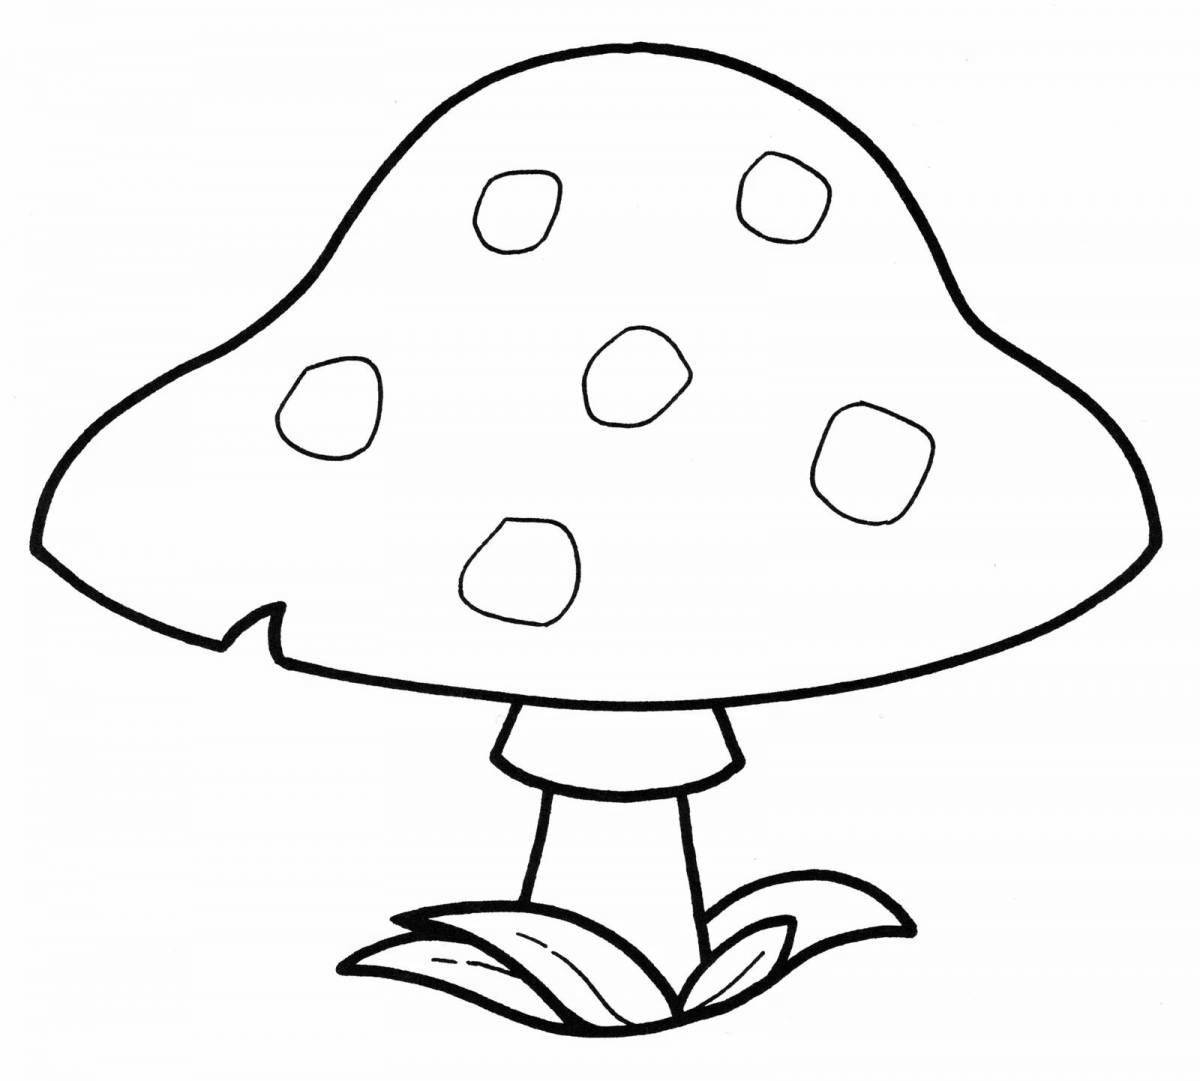 Great coloring fly agaric